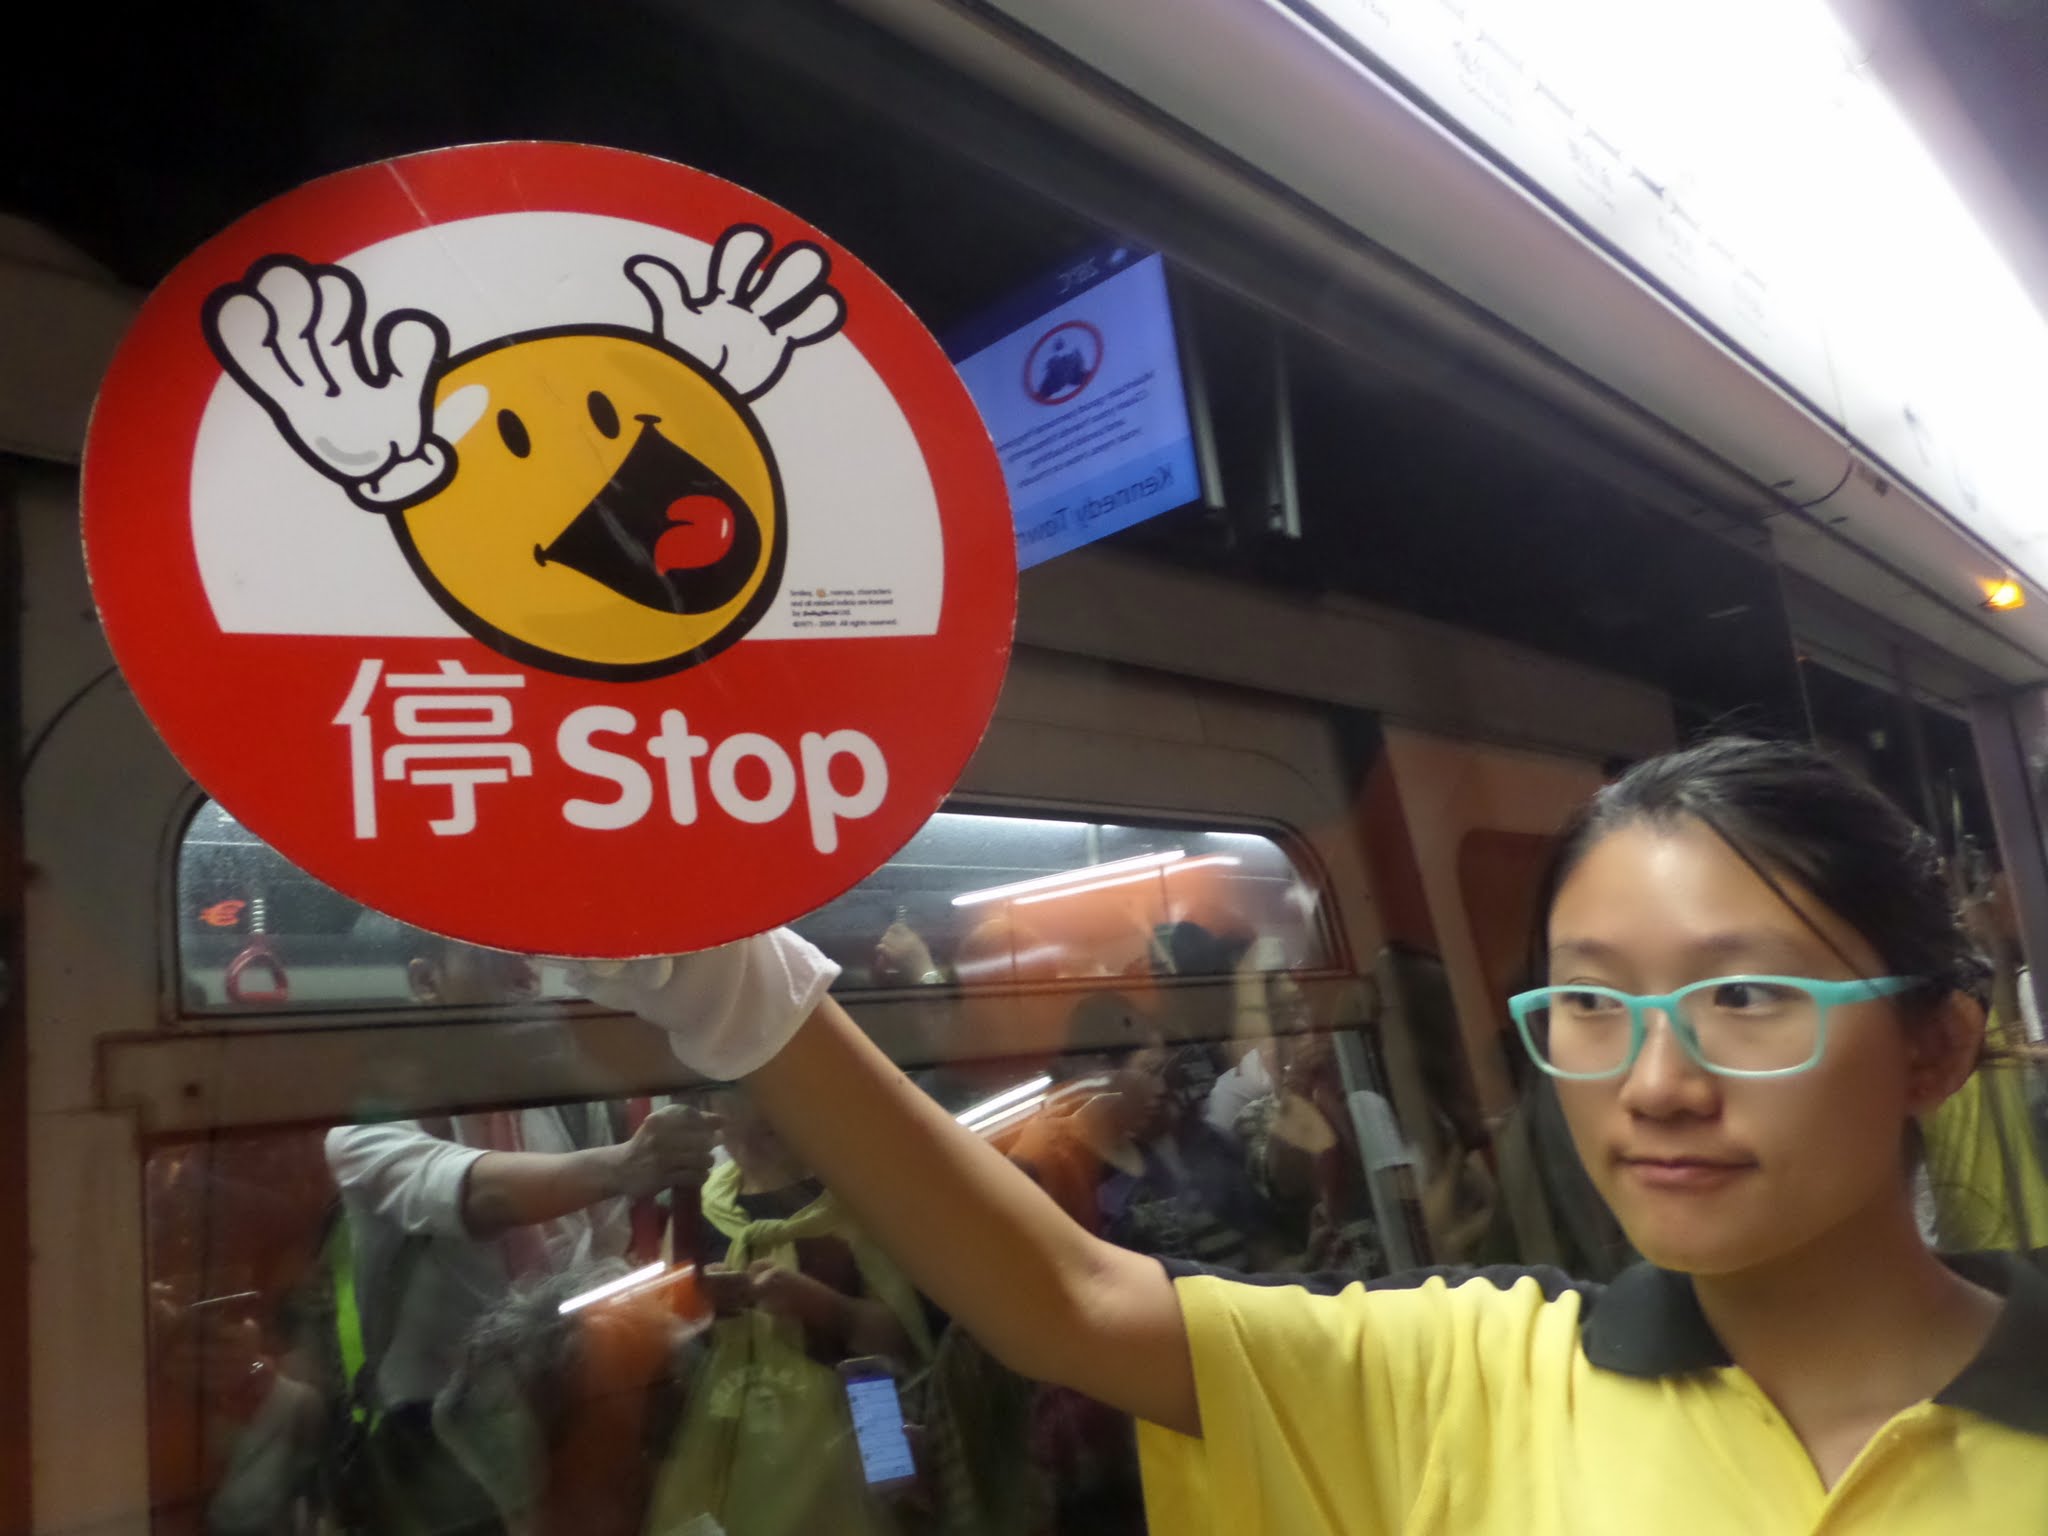 Rush hour stop sign on the Hong Kong MTR